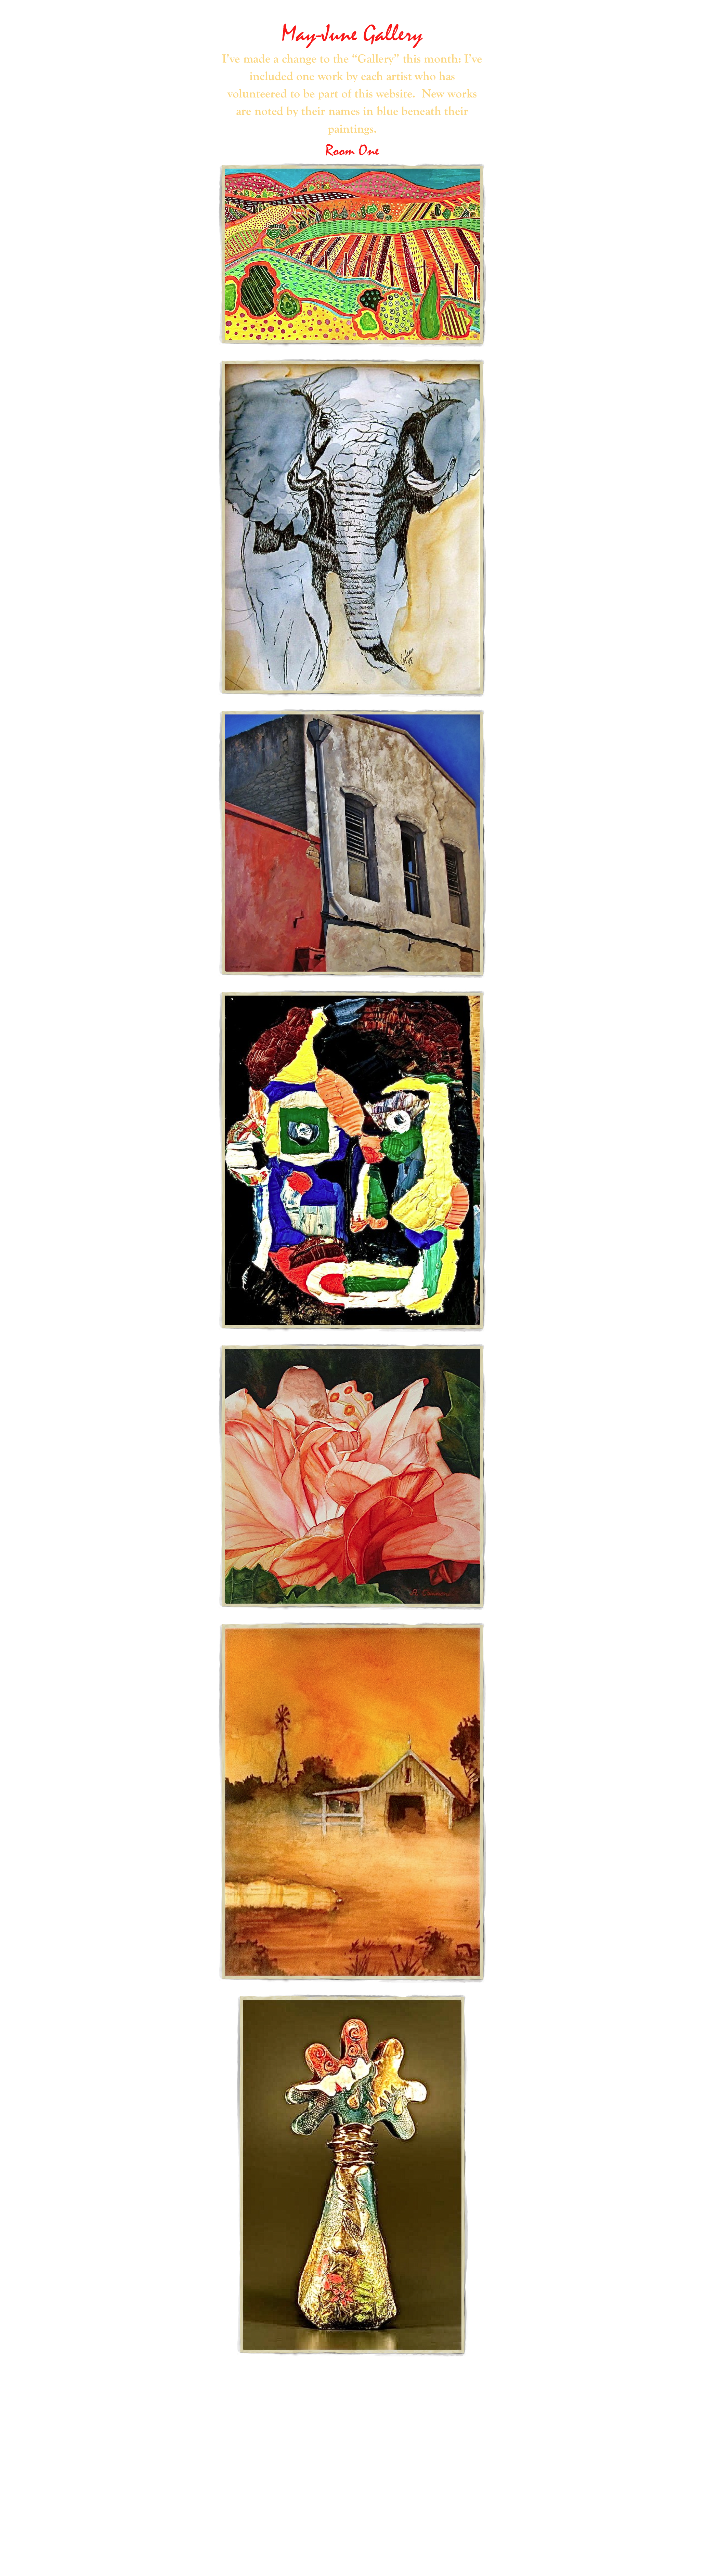 Home Page>   NEW stuff Page>   Writing Content Page>  Guest Artists Page>
May-June Gallery
I’ve made a change to the “Gallery” this month: I’ve included one work by each artist who has volunteered to be part of this website.  New works are noted by their names in blue beneath their paintings.
Room One 
￼
Robin Avery
￼
Coleen Bradfield
￼
Greg Budwine
￼
Mick Burson
￼
Anita Cannon
￼
Anthony Caporina
￼
Claudia Ka Cartee
Exit to Room Two



